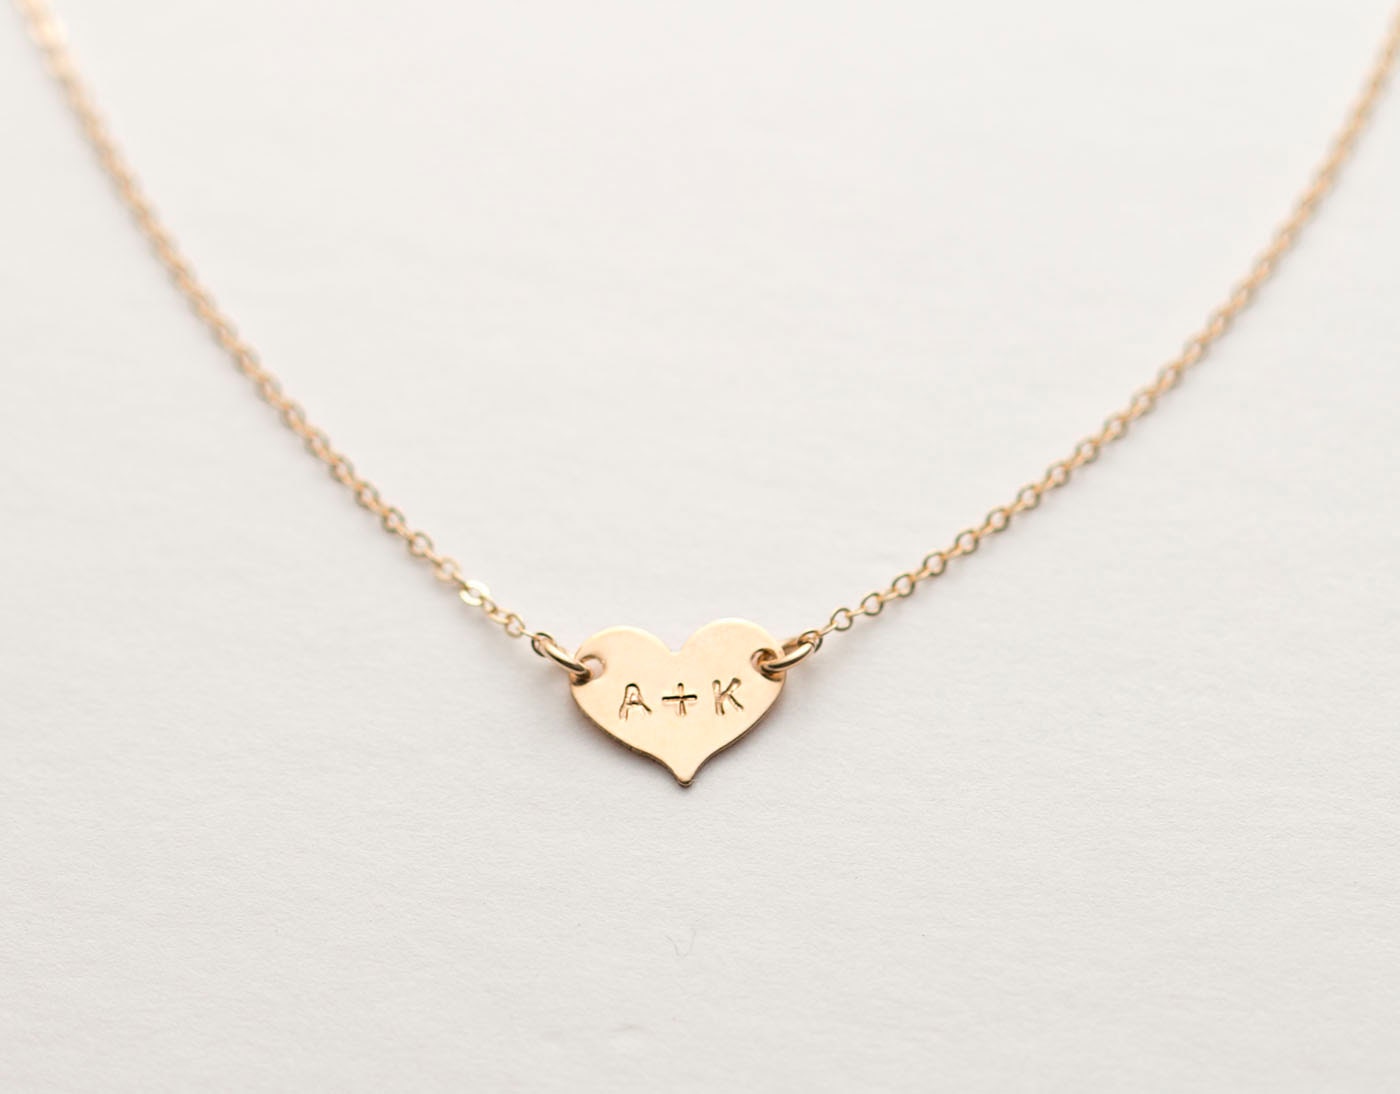 Small Heart Necklace Personalized 14k Gold Fill by LayeredAndLong